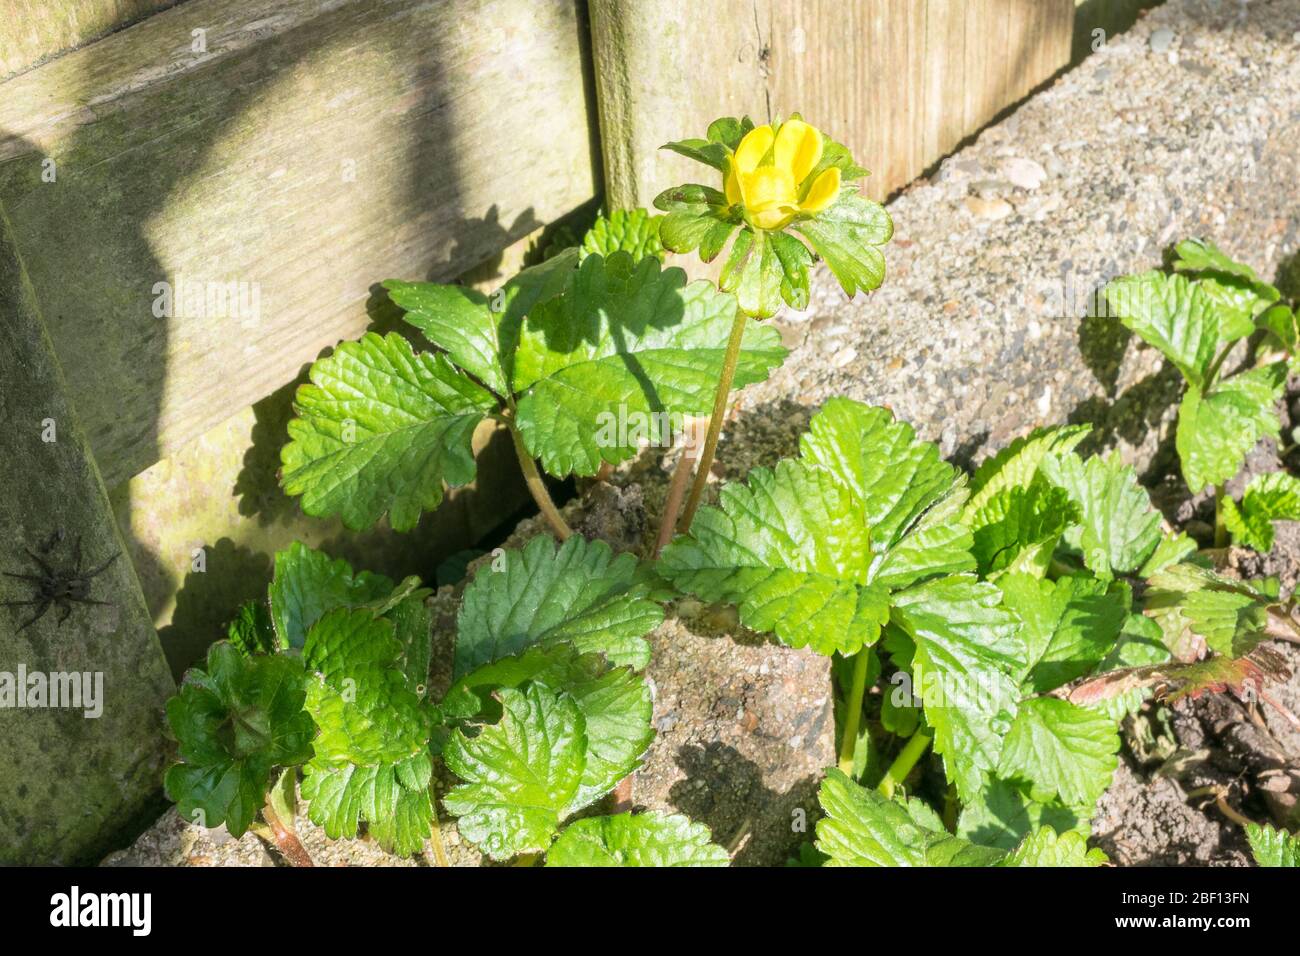 Mock strawberry or false strawberry (latin name: Duchesnea indica, sometimes called Potentilla indica) with bright yellow flower in spring Stock Photo